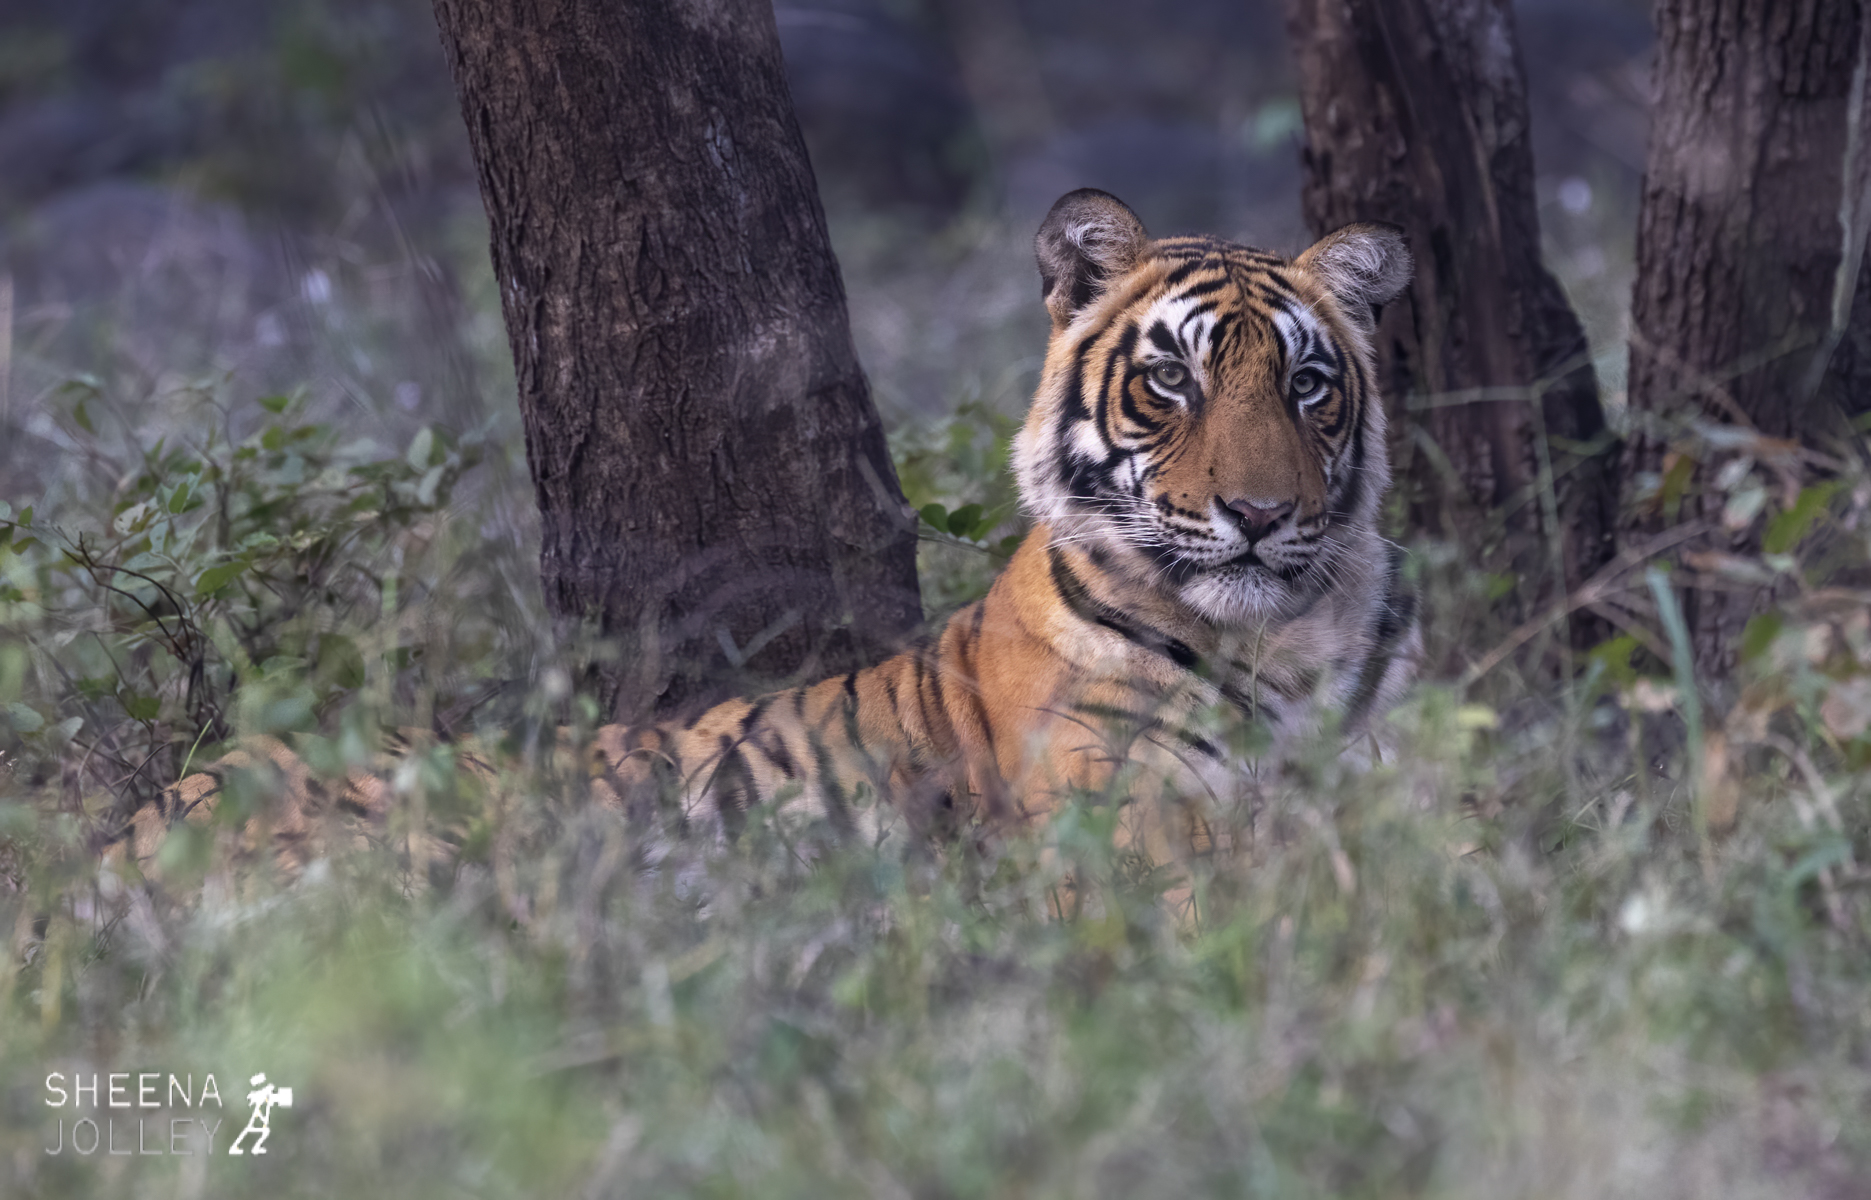 One year old Bengal Tiger 2.jpg - India